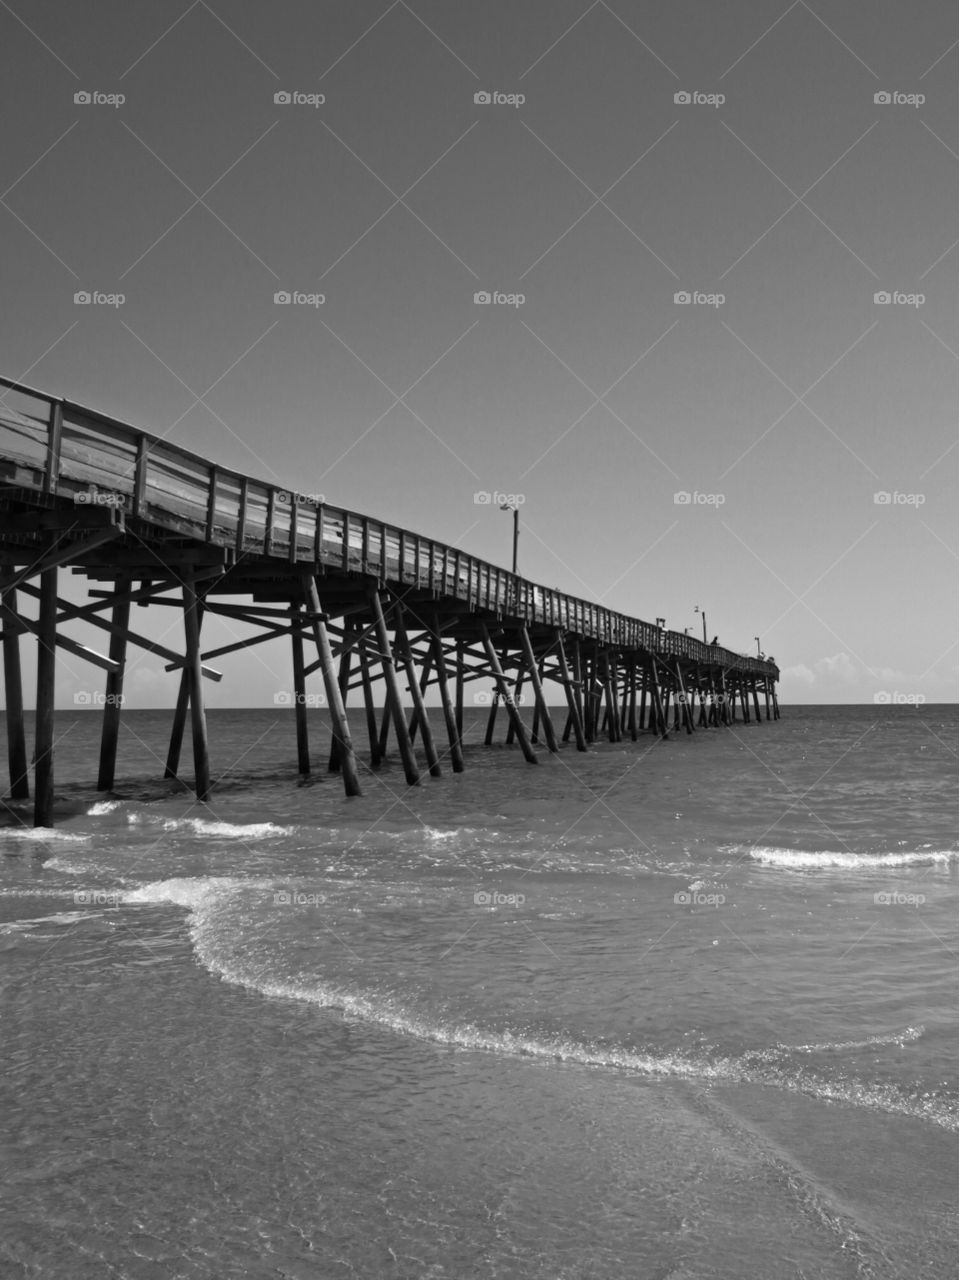 Everything look better in black and white, beautiful pier out in the ocean